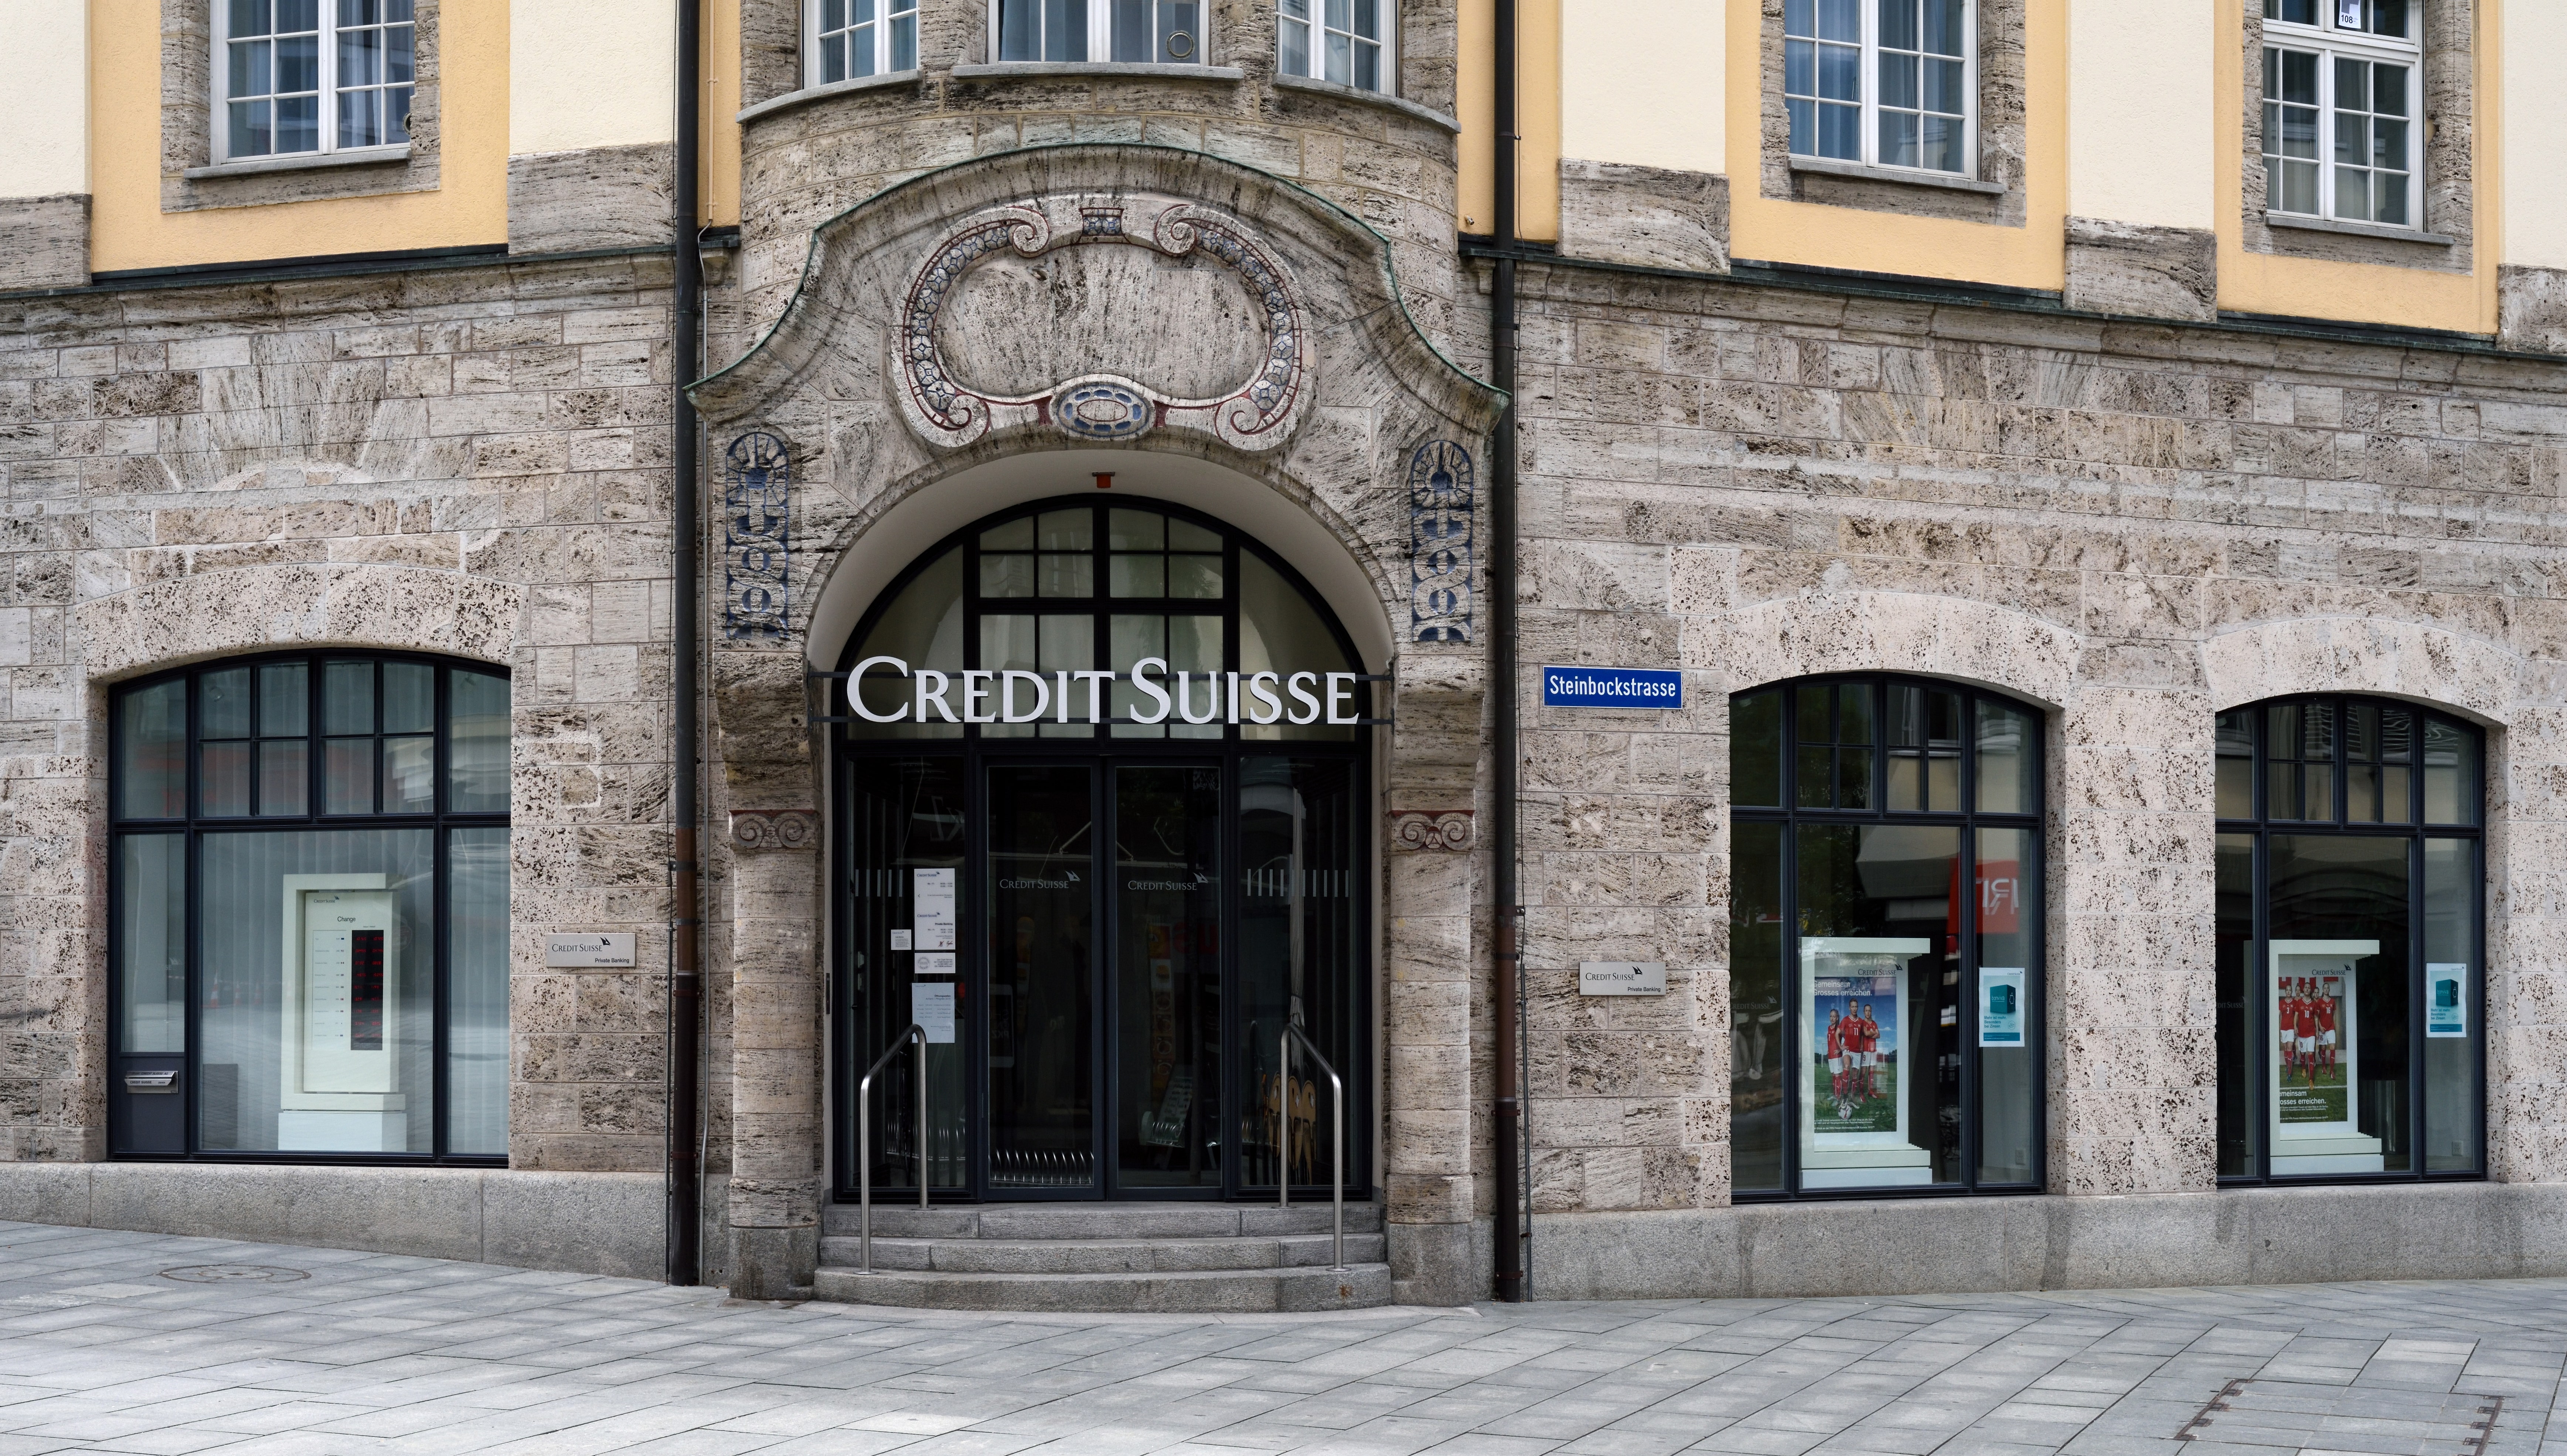 Middle Eastern Investors May Own A Fourth In Credit Suisse, As Qatar Investment Mulls Raising Stake